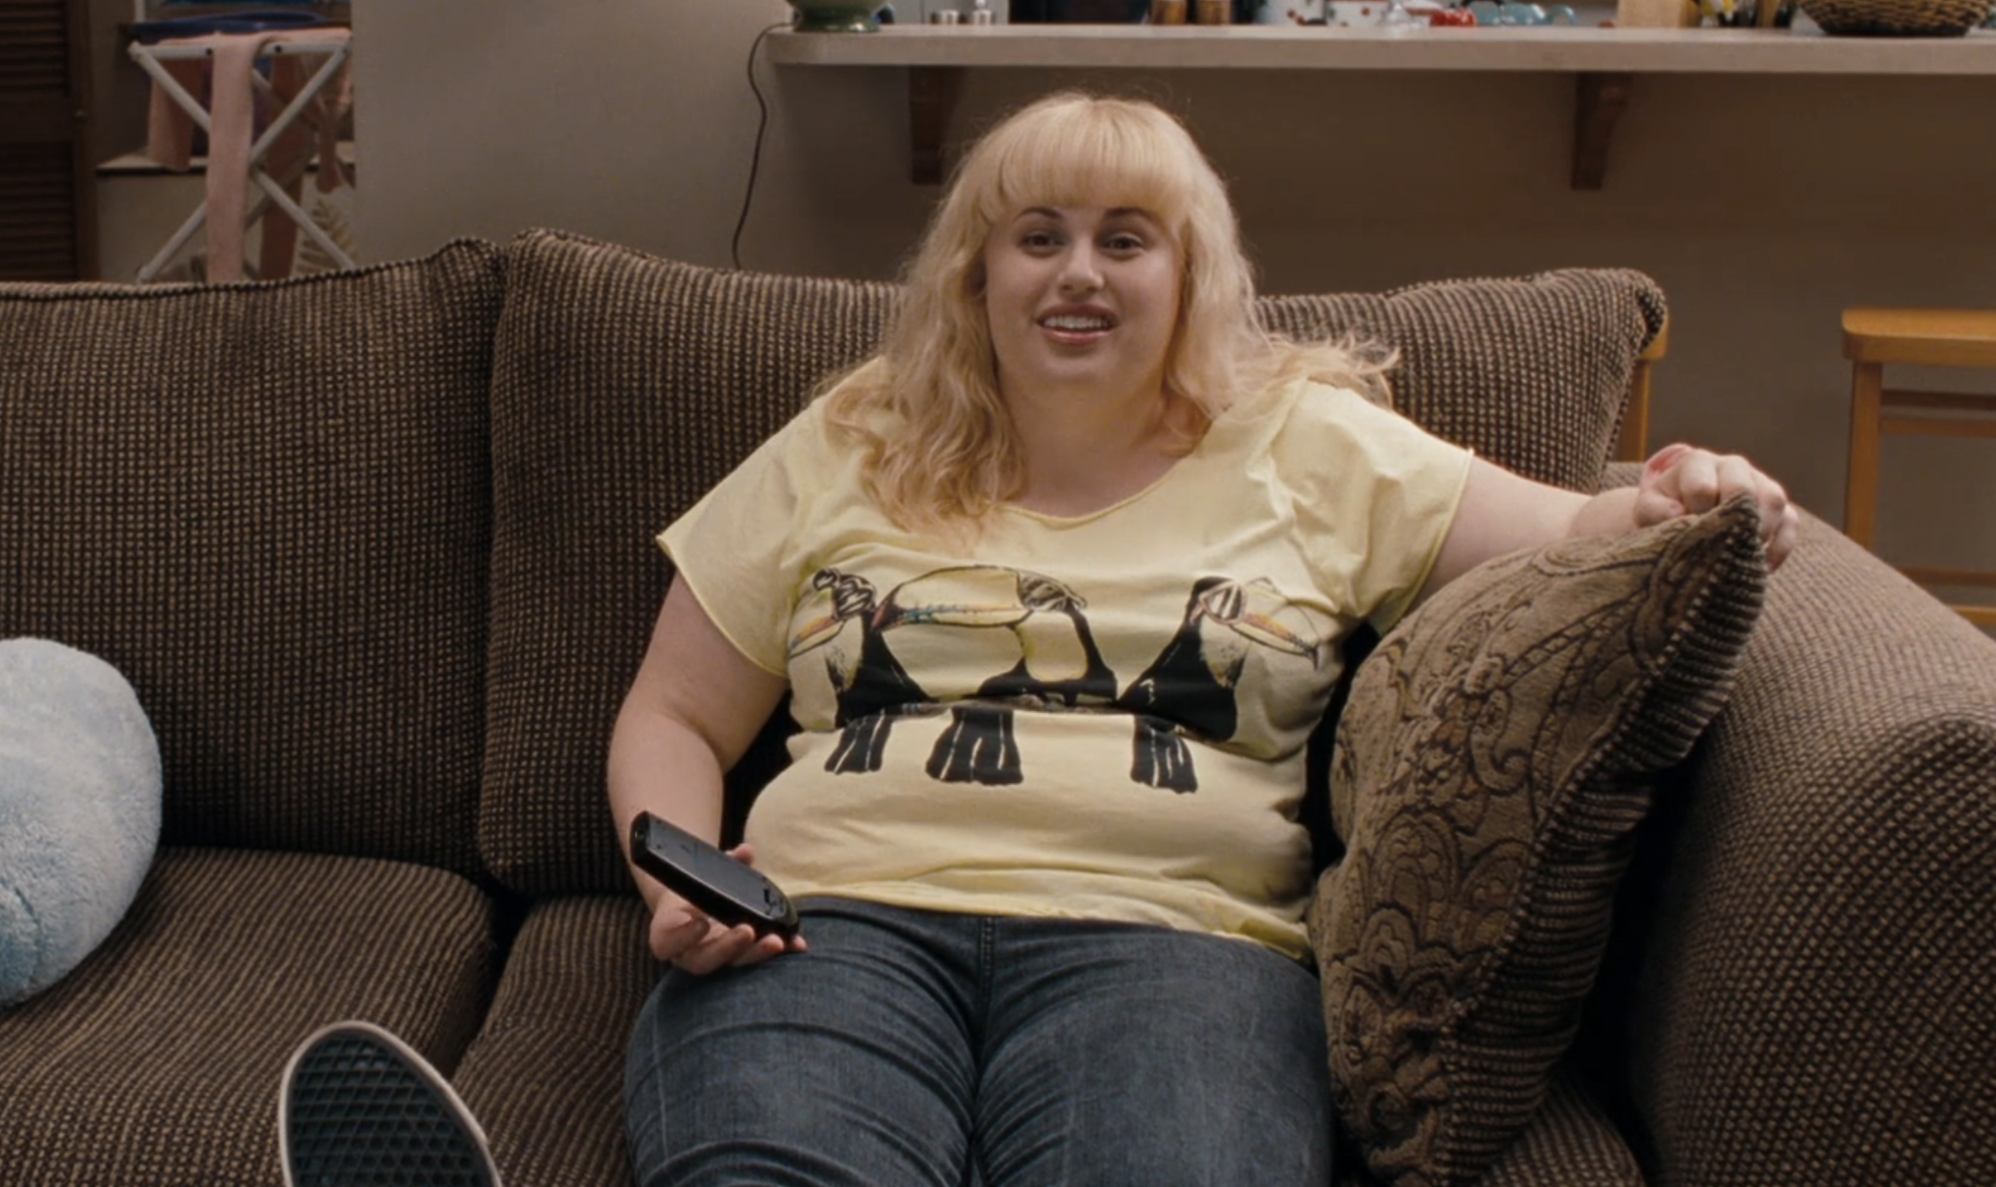 A woman sitting on a sofa, holding a remote, wearing a T-shirt with a graphic design, and expressing contentment